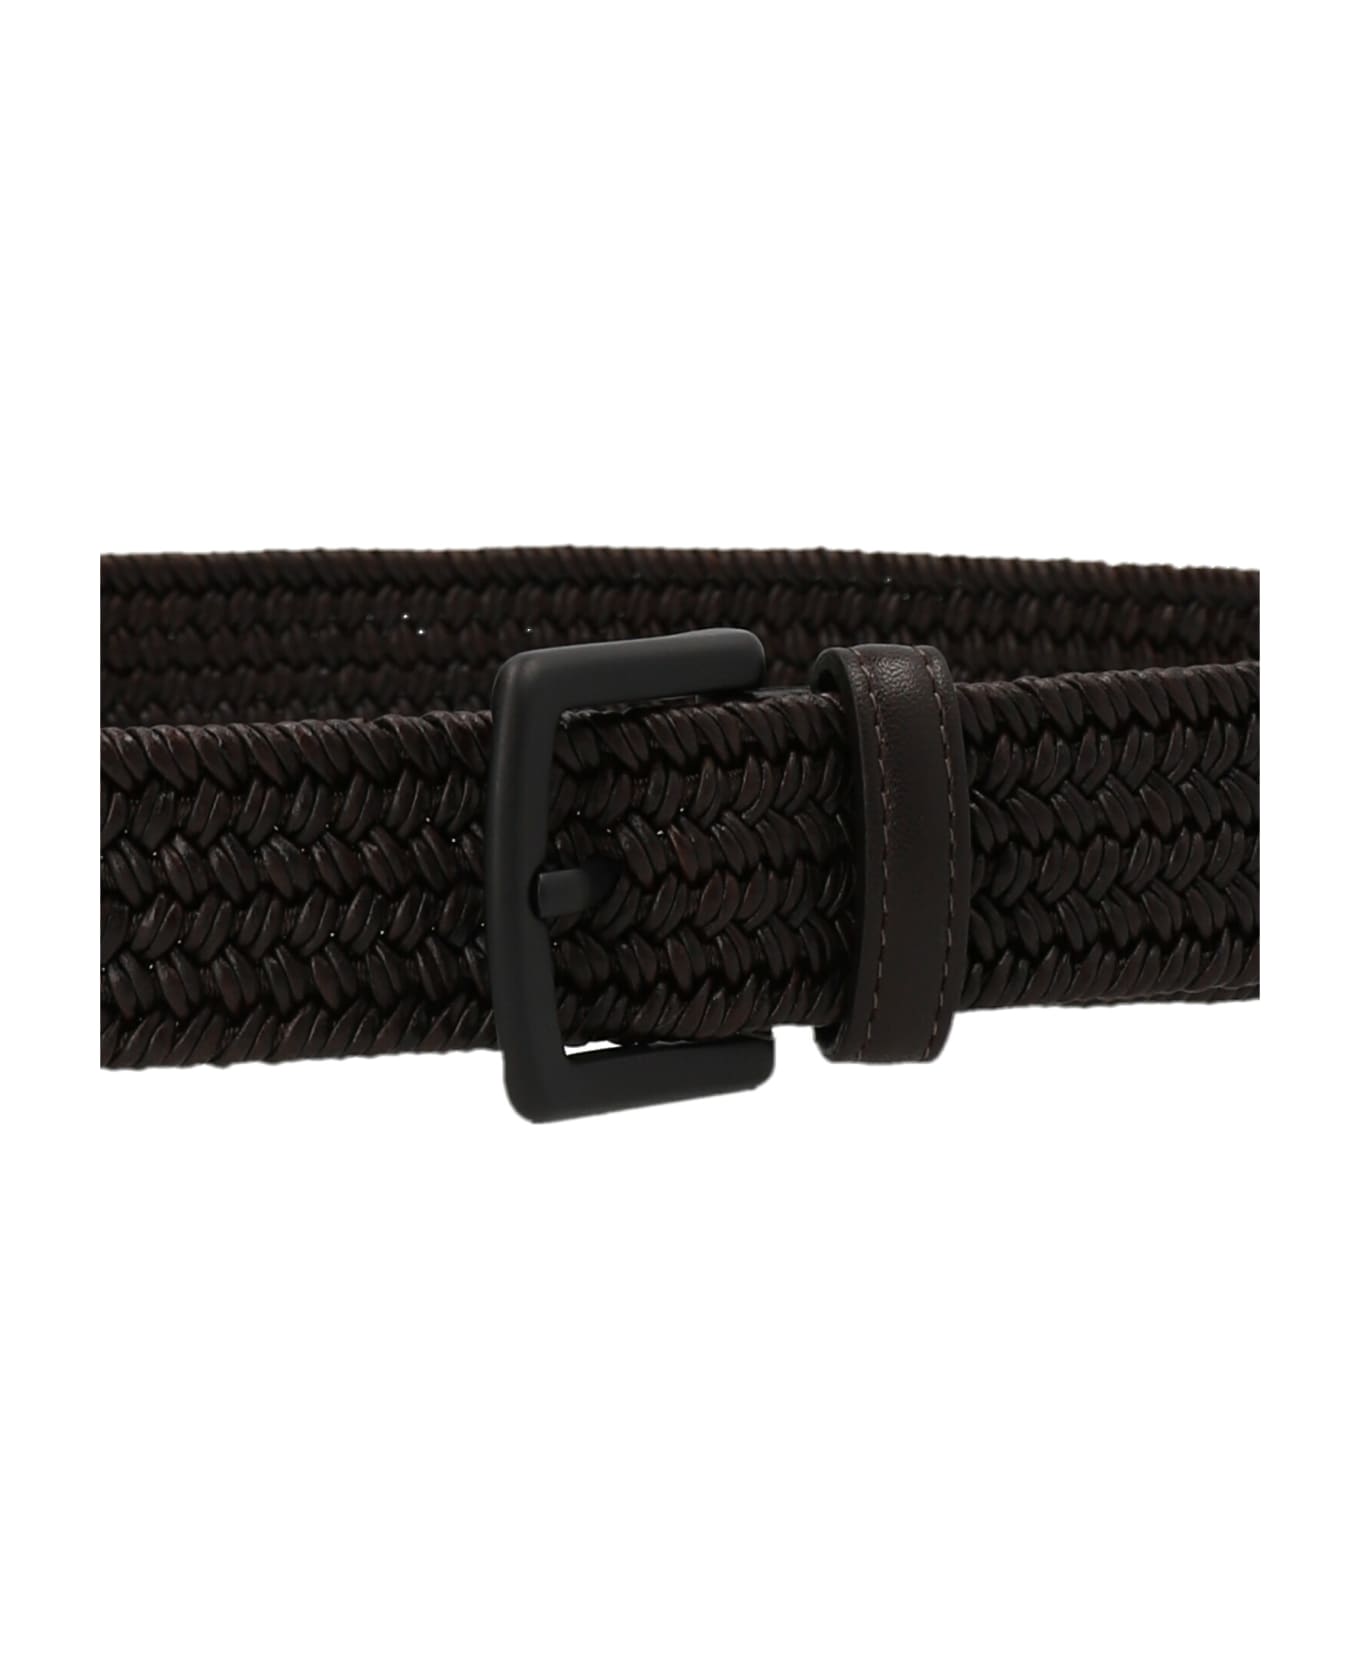 D'Amico Braided Leather Belt - Brown